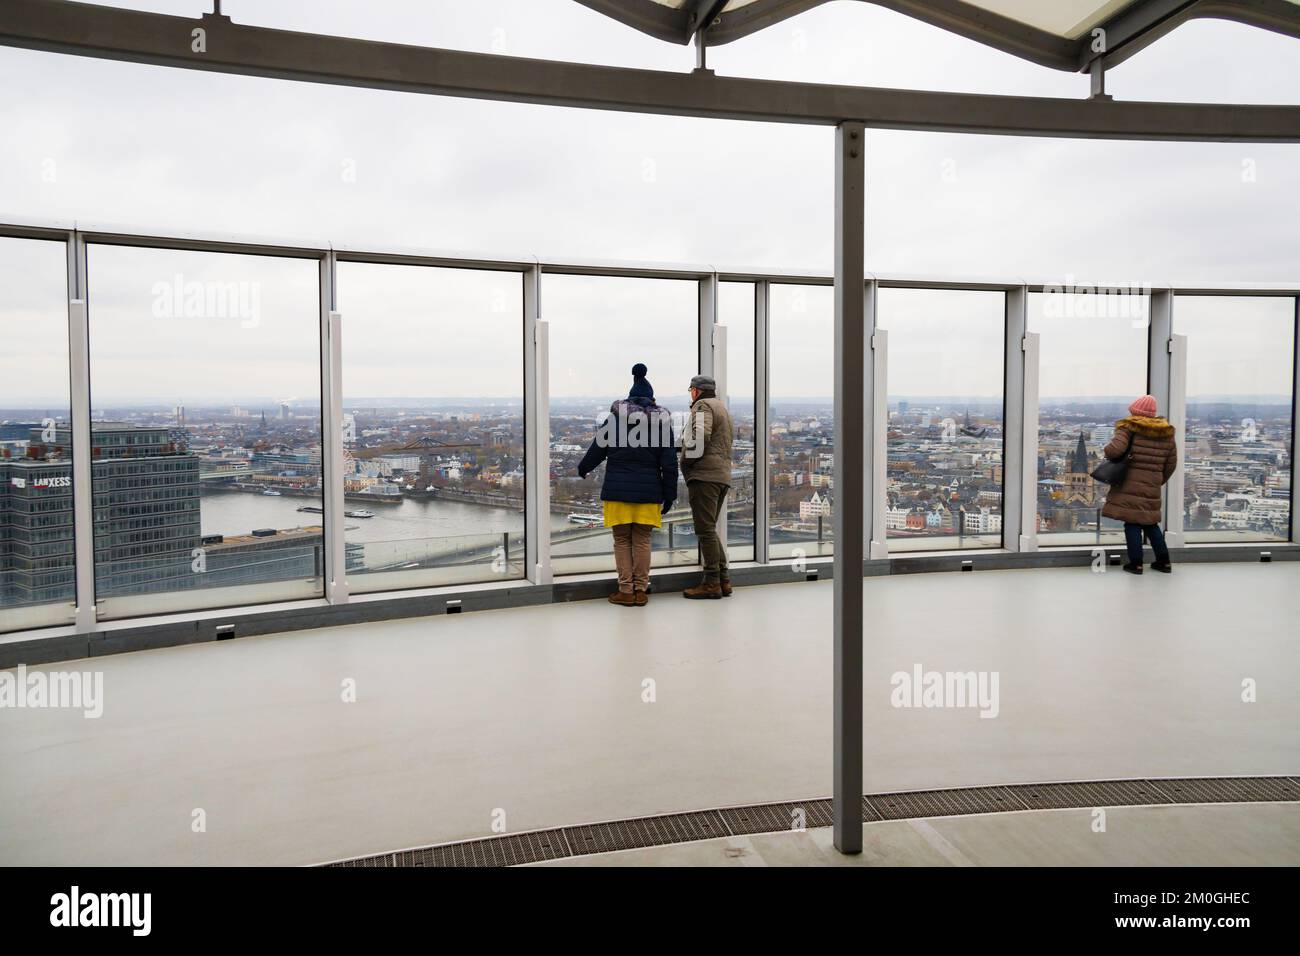 Tourists in the Triangle Tower rooftop viewpoint overlooking Koln Cologne, North Rhine Westfalia, West Germany Stock Photo